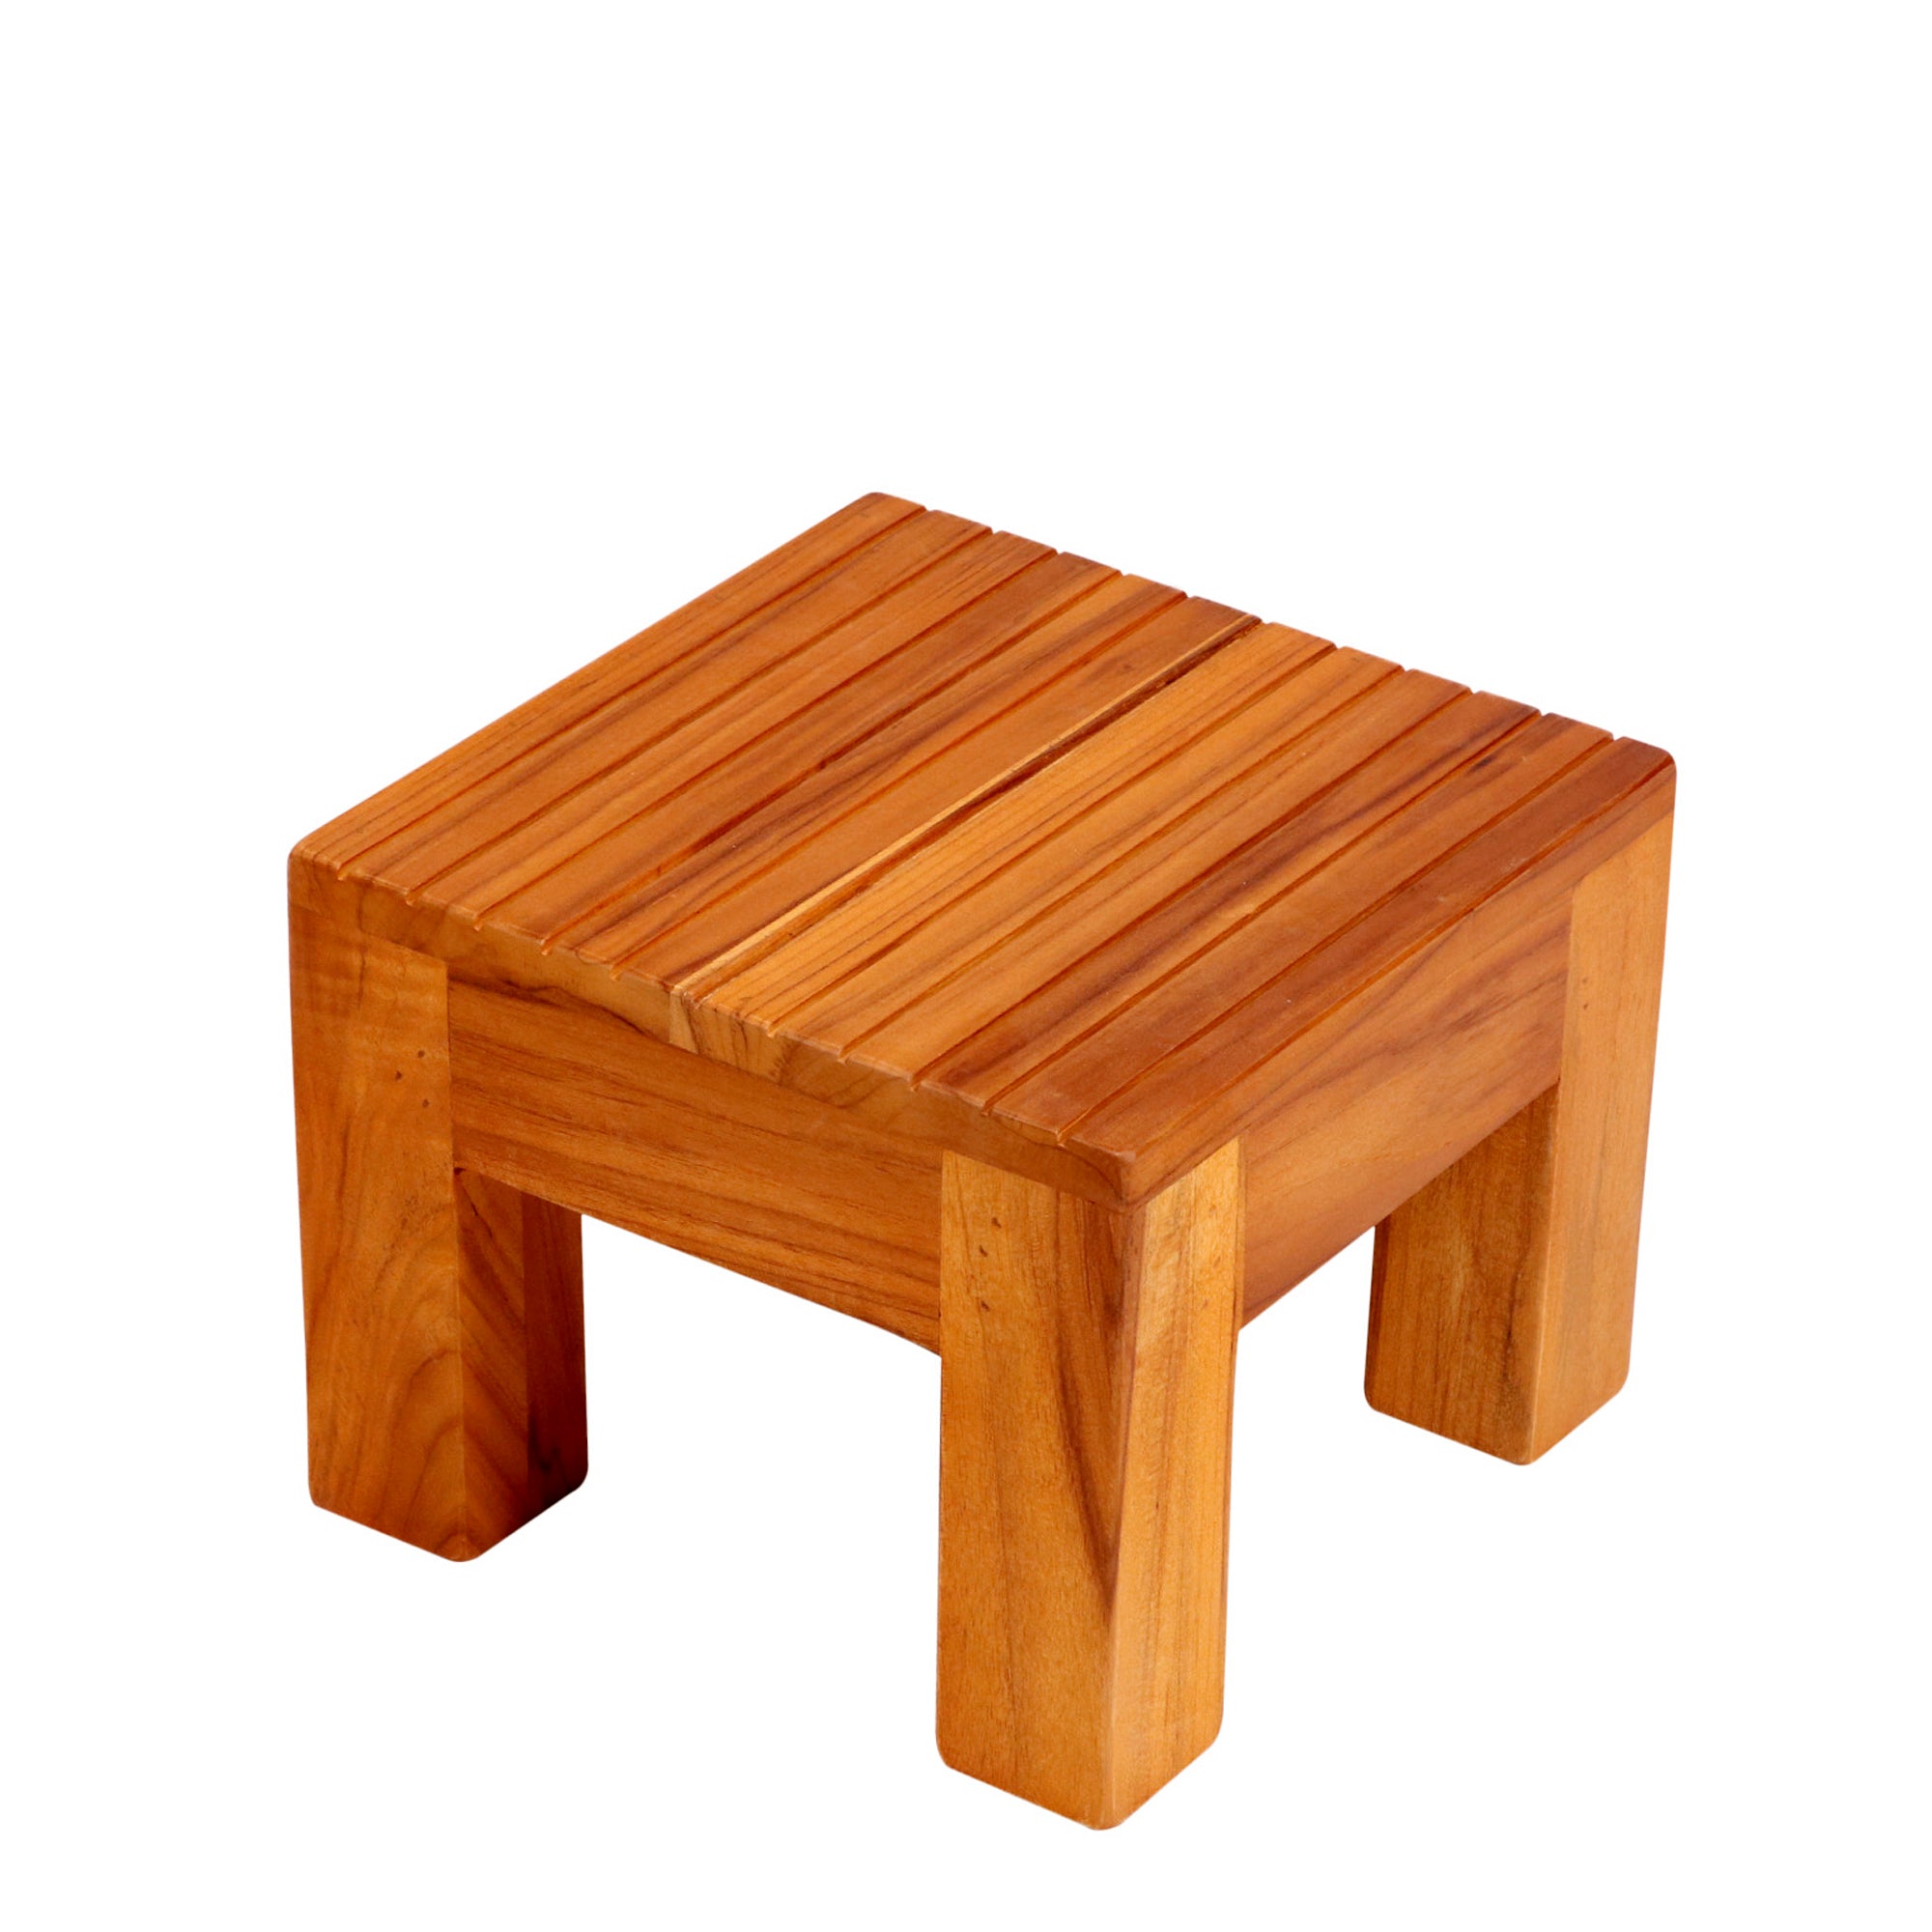 Strip based rock concept solid wood compact Stool Stool